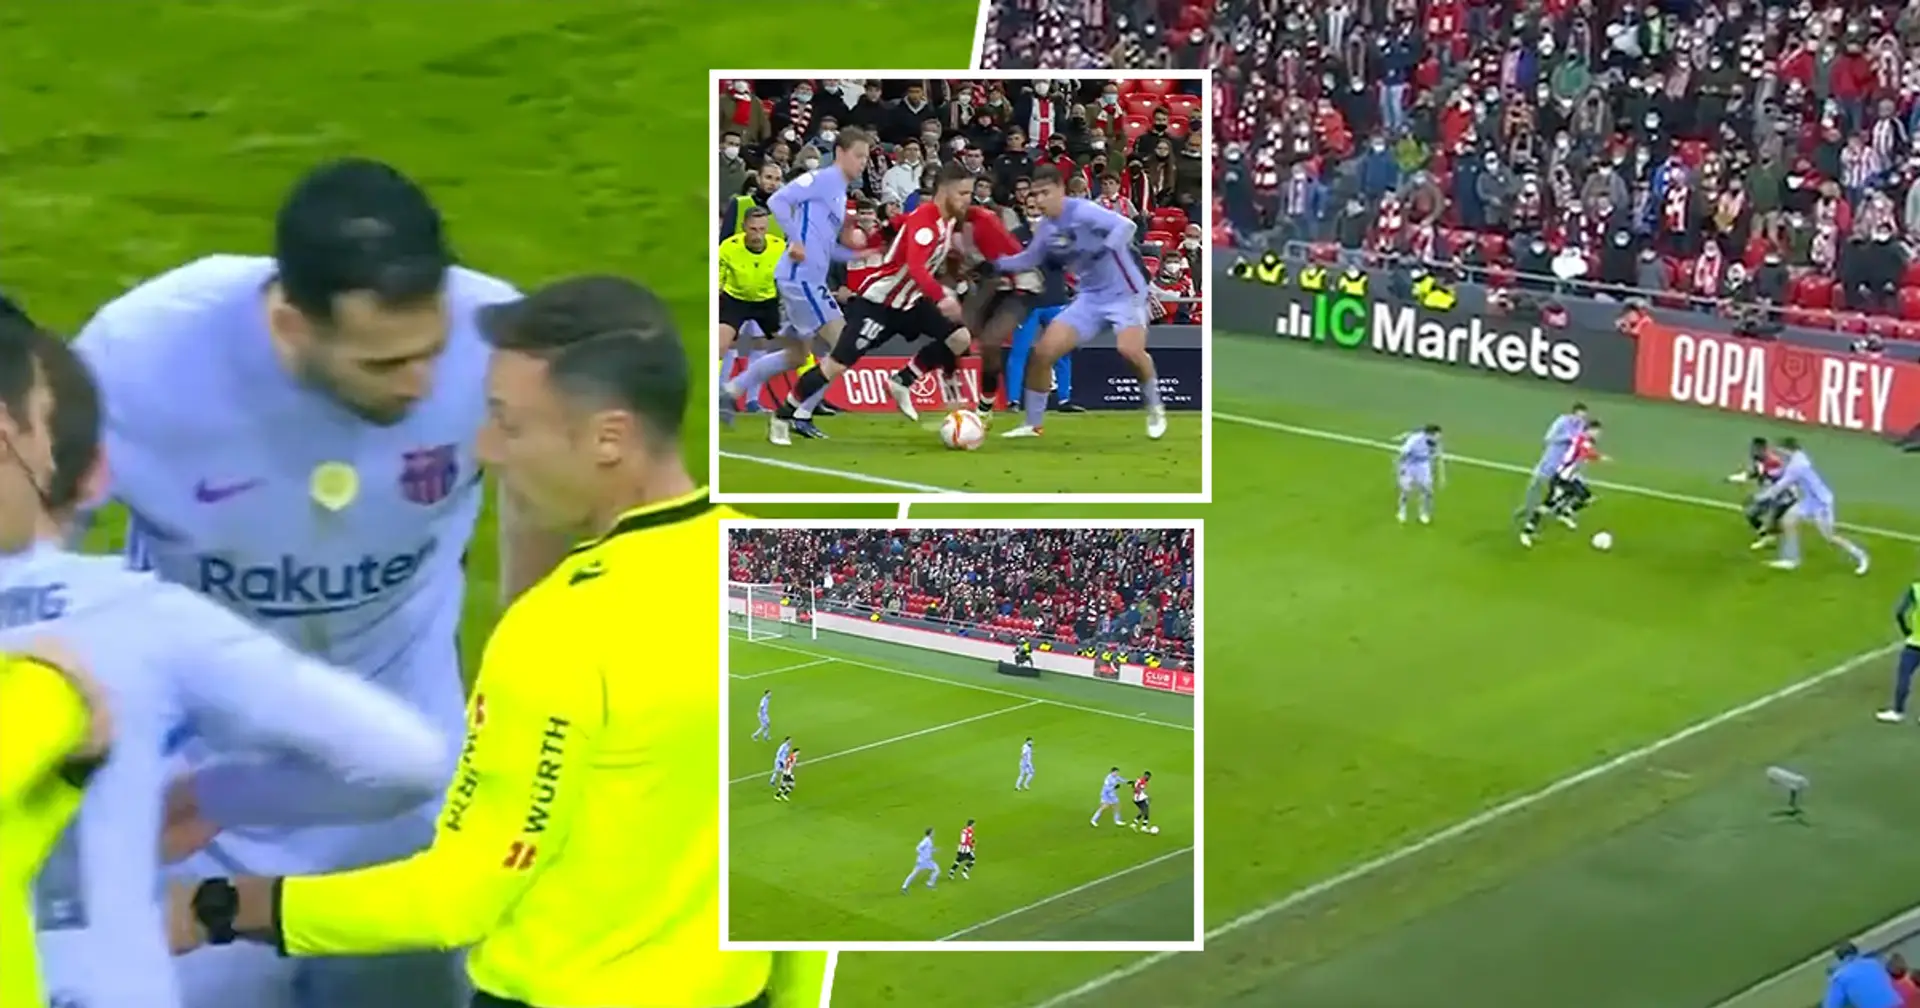 Spotted: Bilbao's epic time-wasting antics in Copa del Rey win against Barca